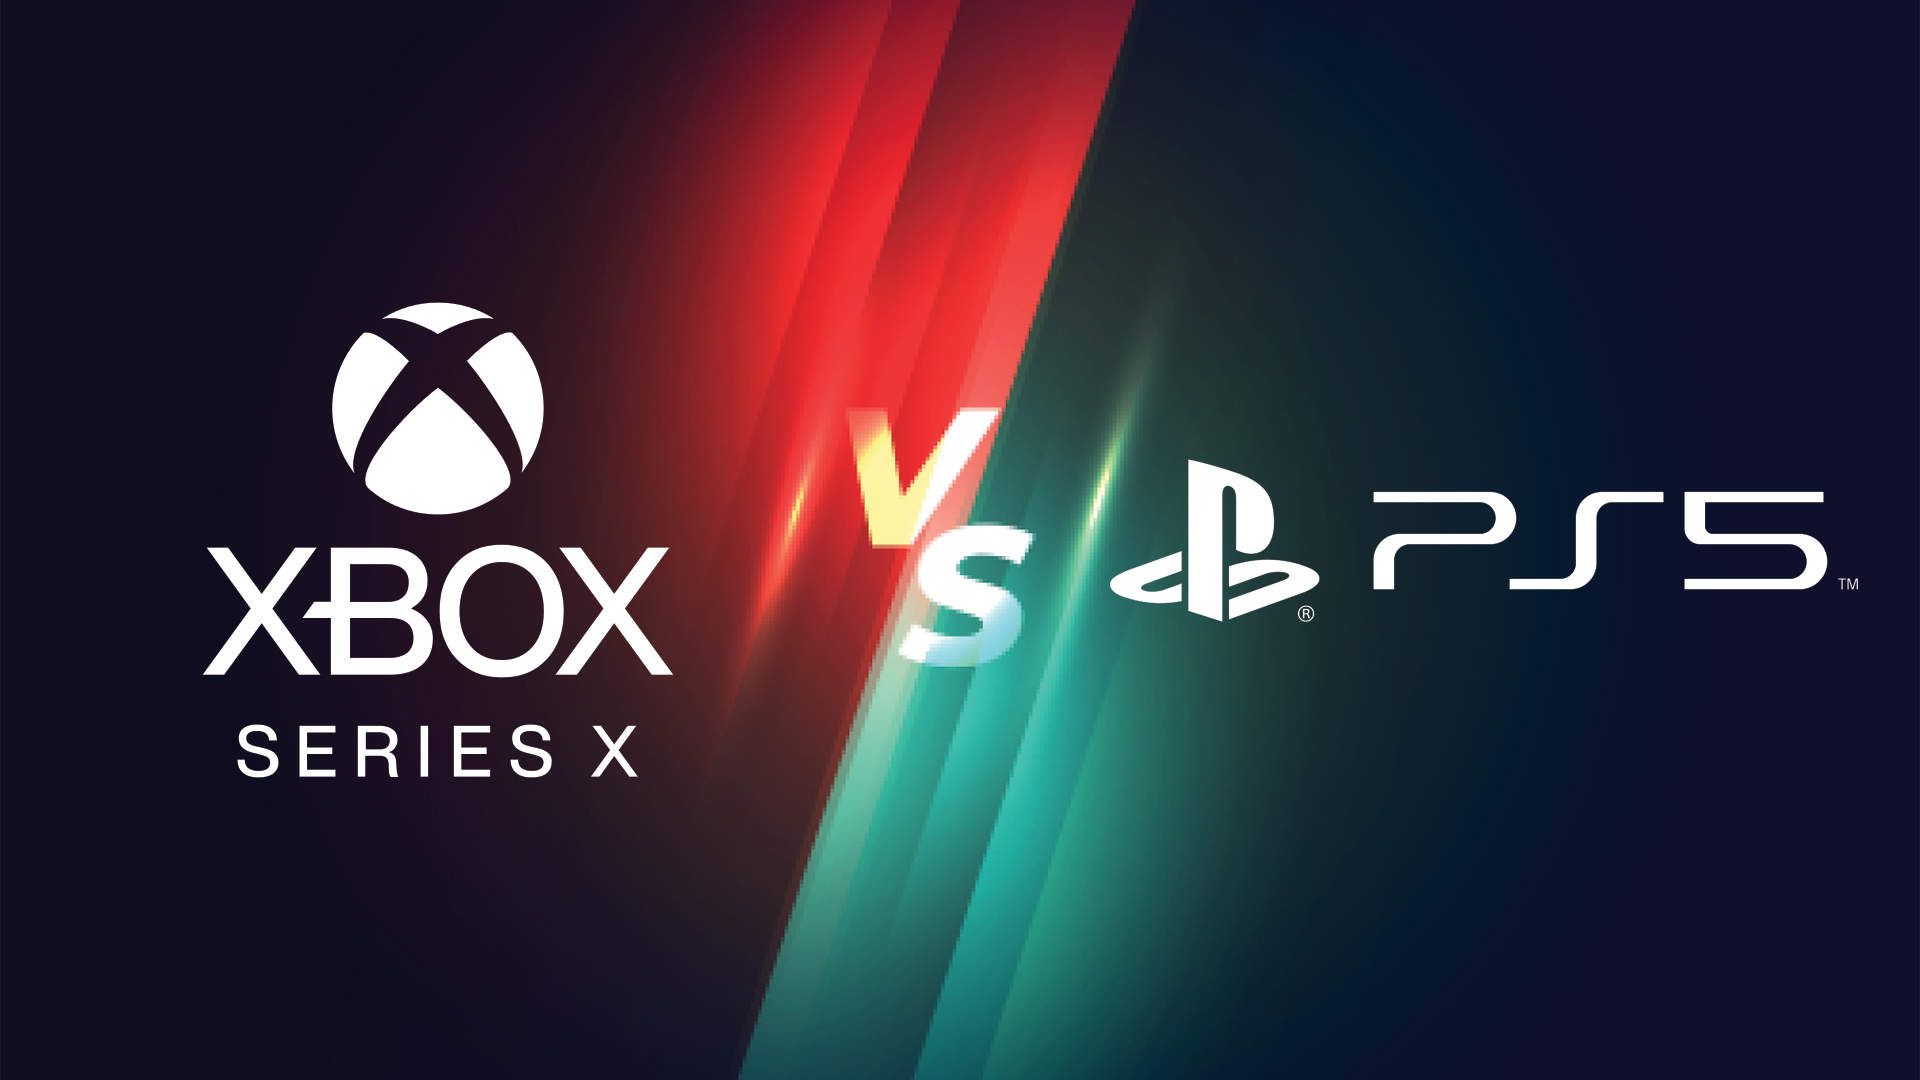 PS5 And Xbox Series X Specs Analysis: How The Next Gen Consoles Stack Up